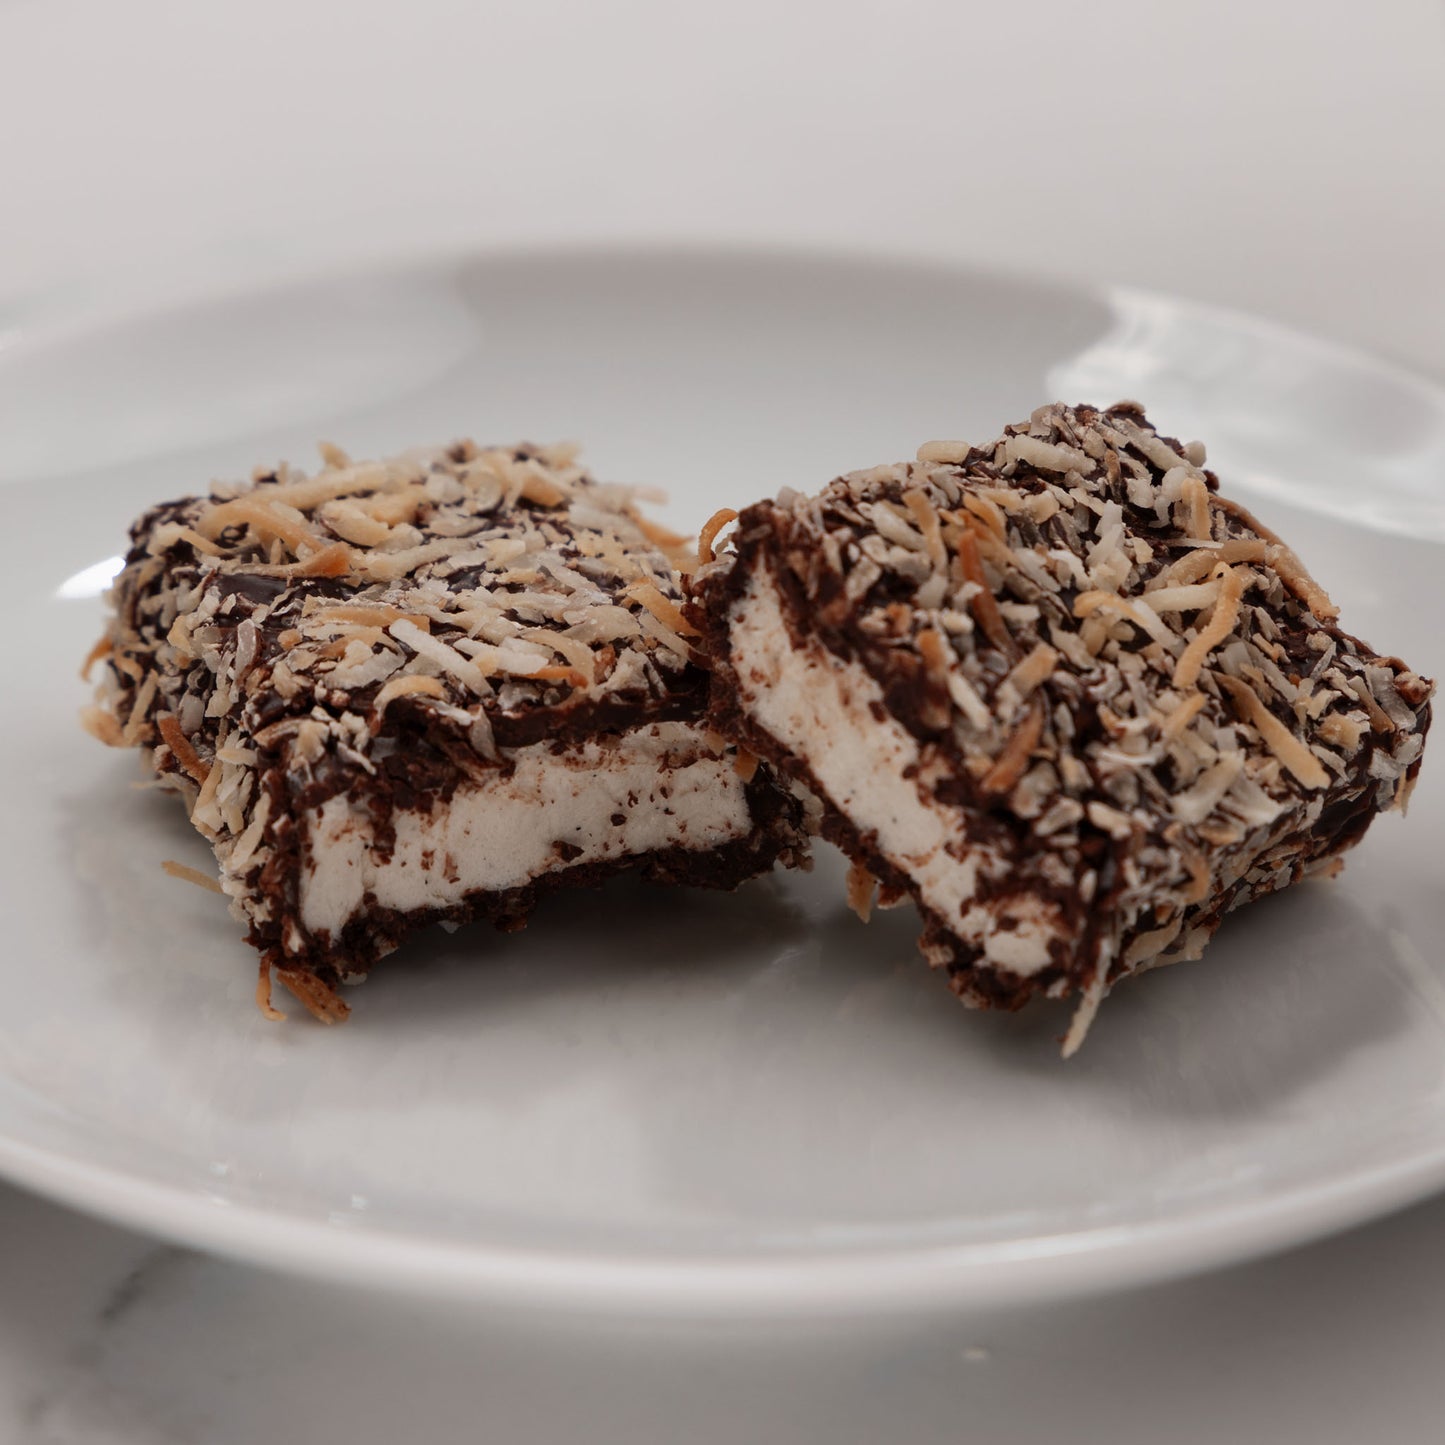 2 Dark Chocolate Dipped Marshmallow Rolled in Coconut Bars